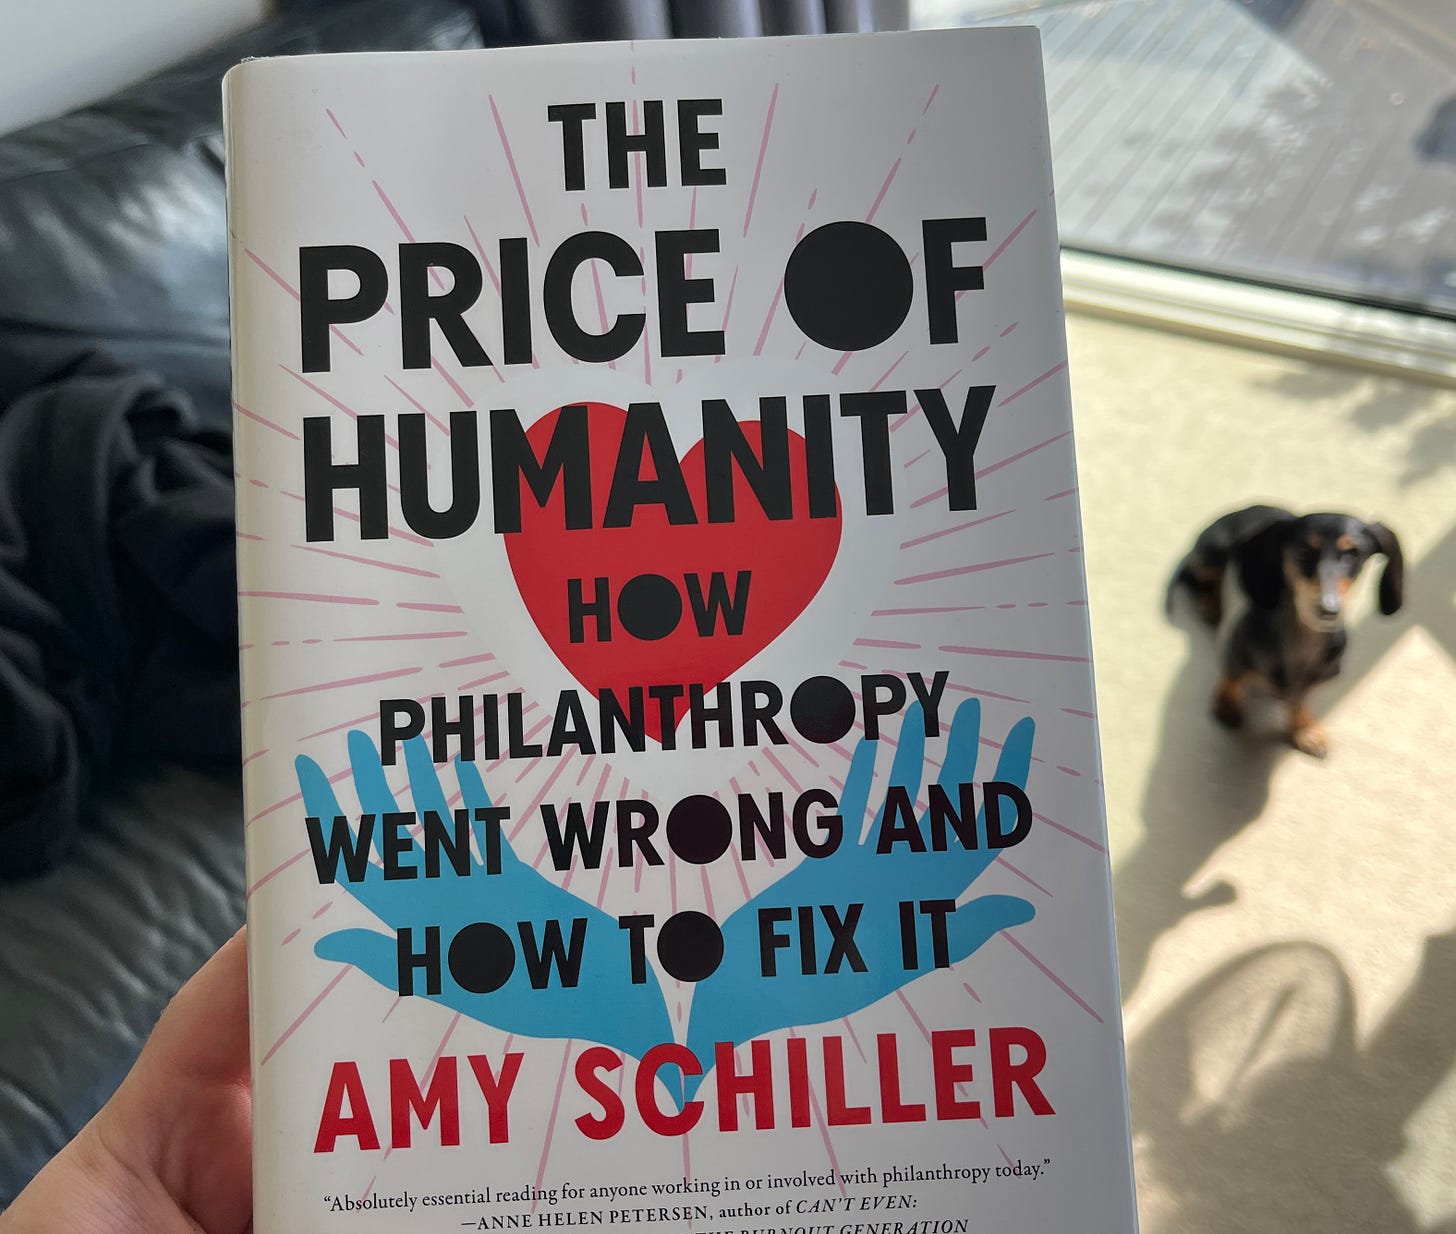 In the foreground a hand holds a book titled The Price of Humanity, how philanthropy when wrong and how to fix it, by Amy Schiller. In the background a blurry dachshund looks on.